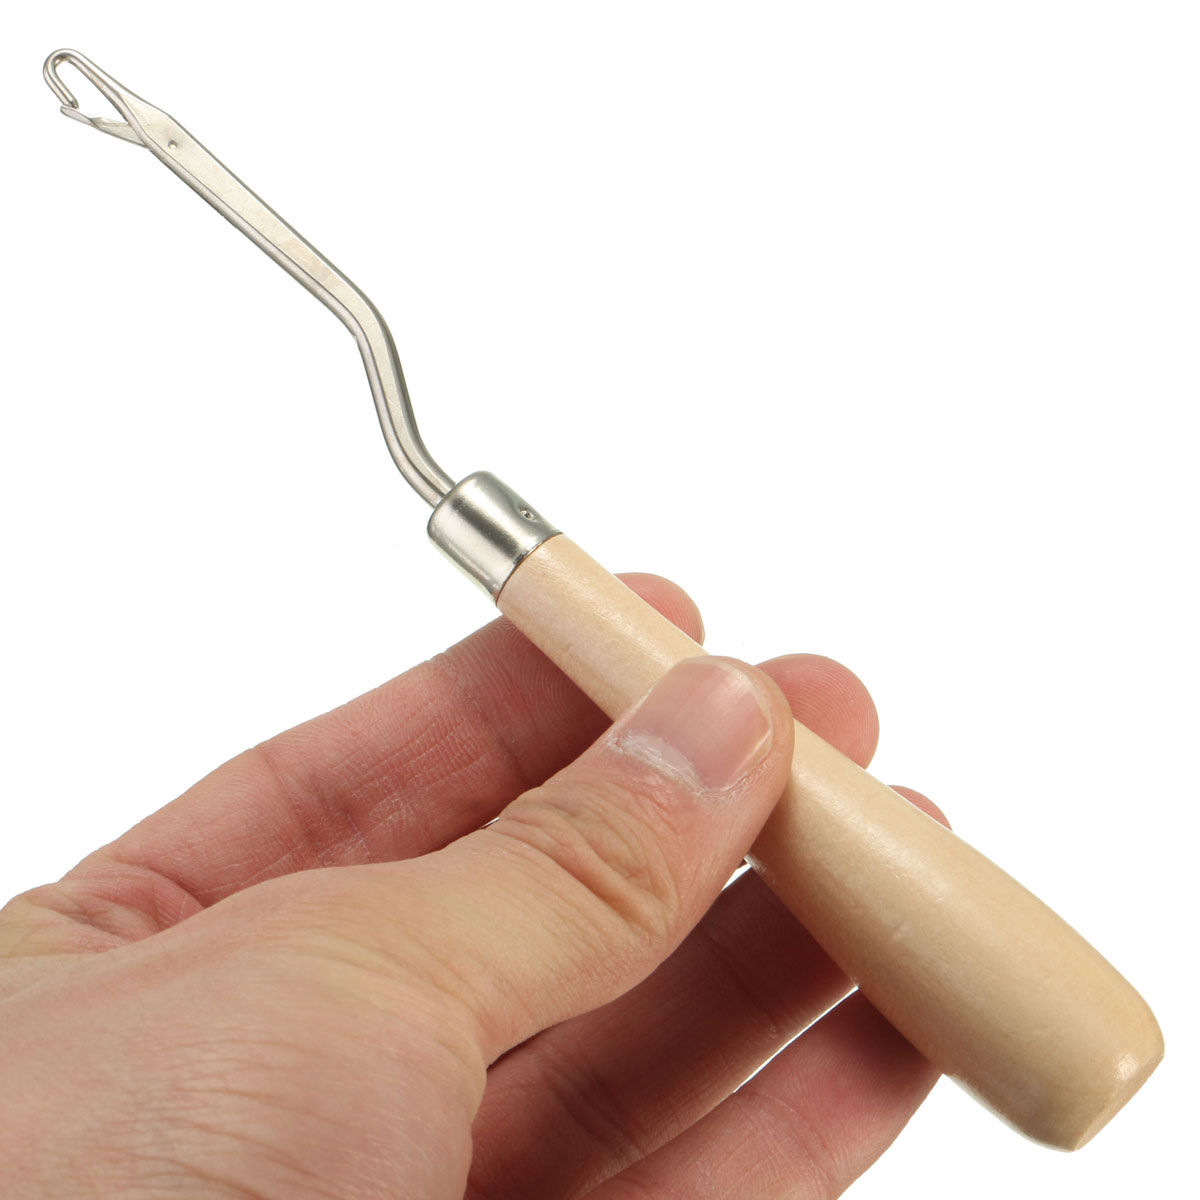 Wooden-Handle-Crochet-Needle-Latch-Hook-Puller-Tool-For-Canvas-Rug-Mats-Making-1041374